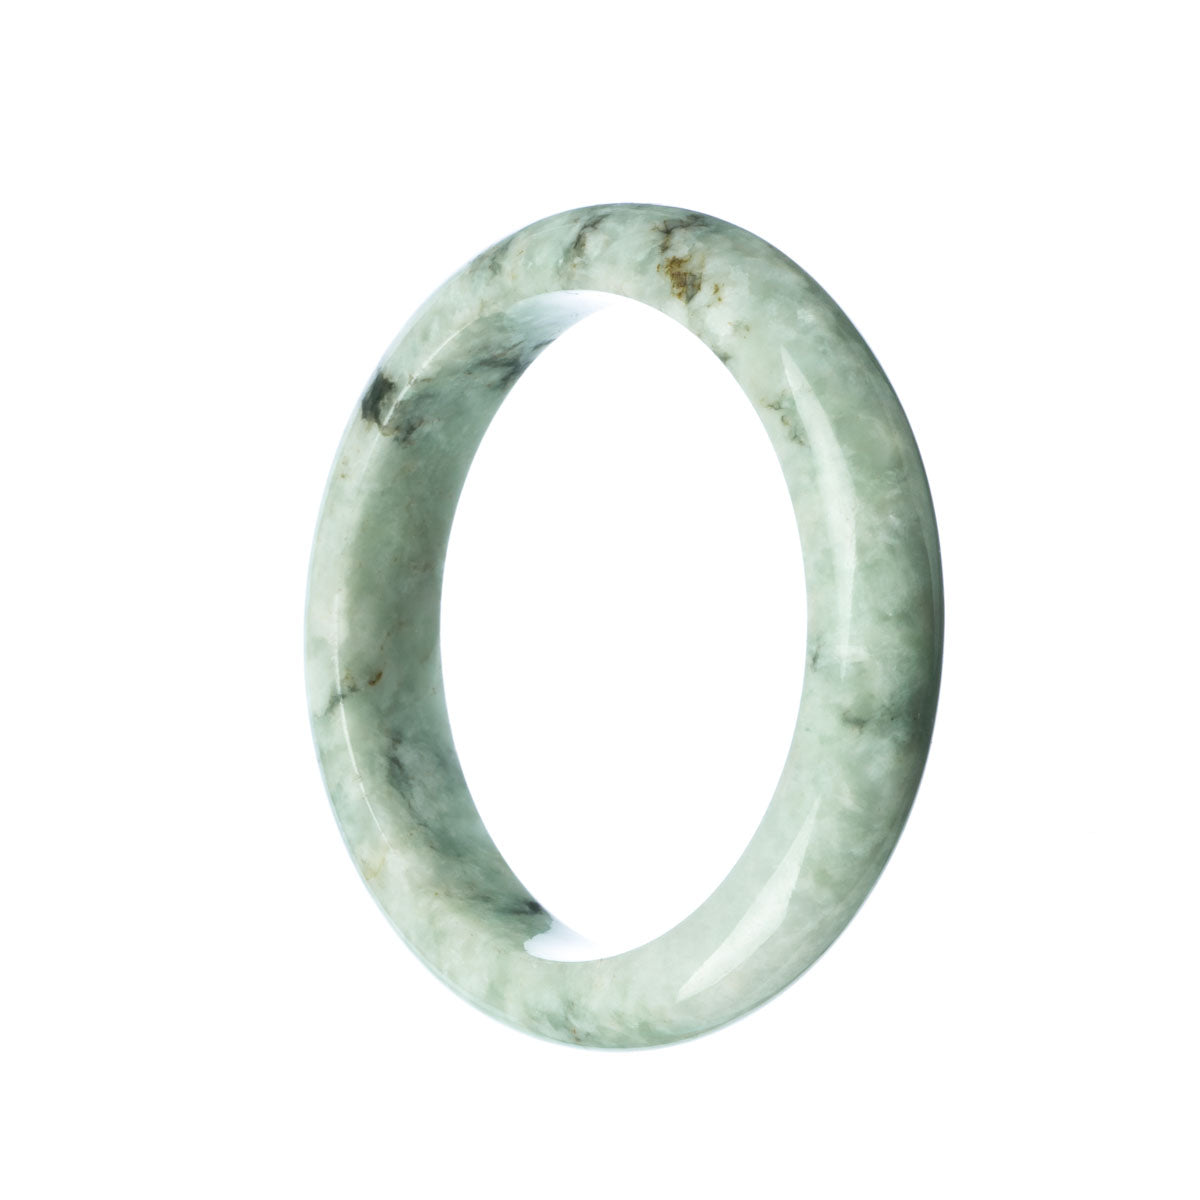 A close-up photo of an authentic Type A pale green jadeite bangle. The bangle is semi-round and has a diameter of 59mm. It is a fine piece of jewelry from the brand MAYS™.